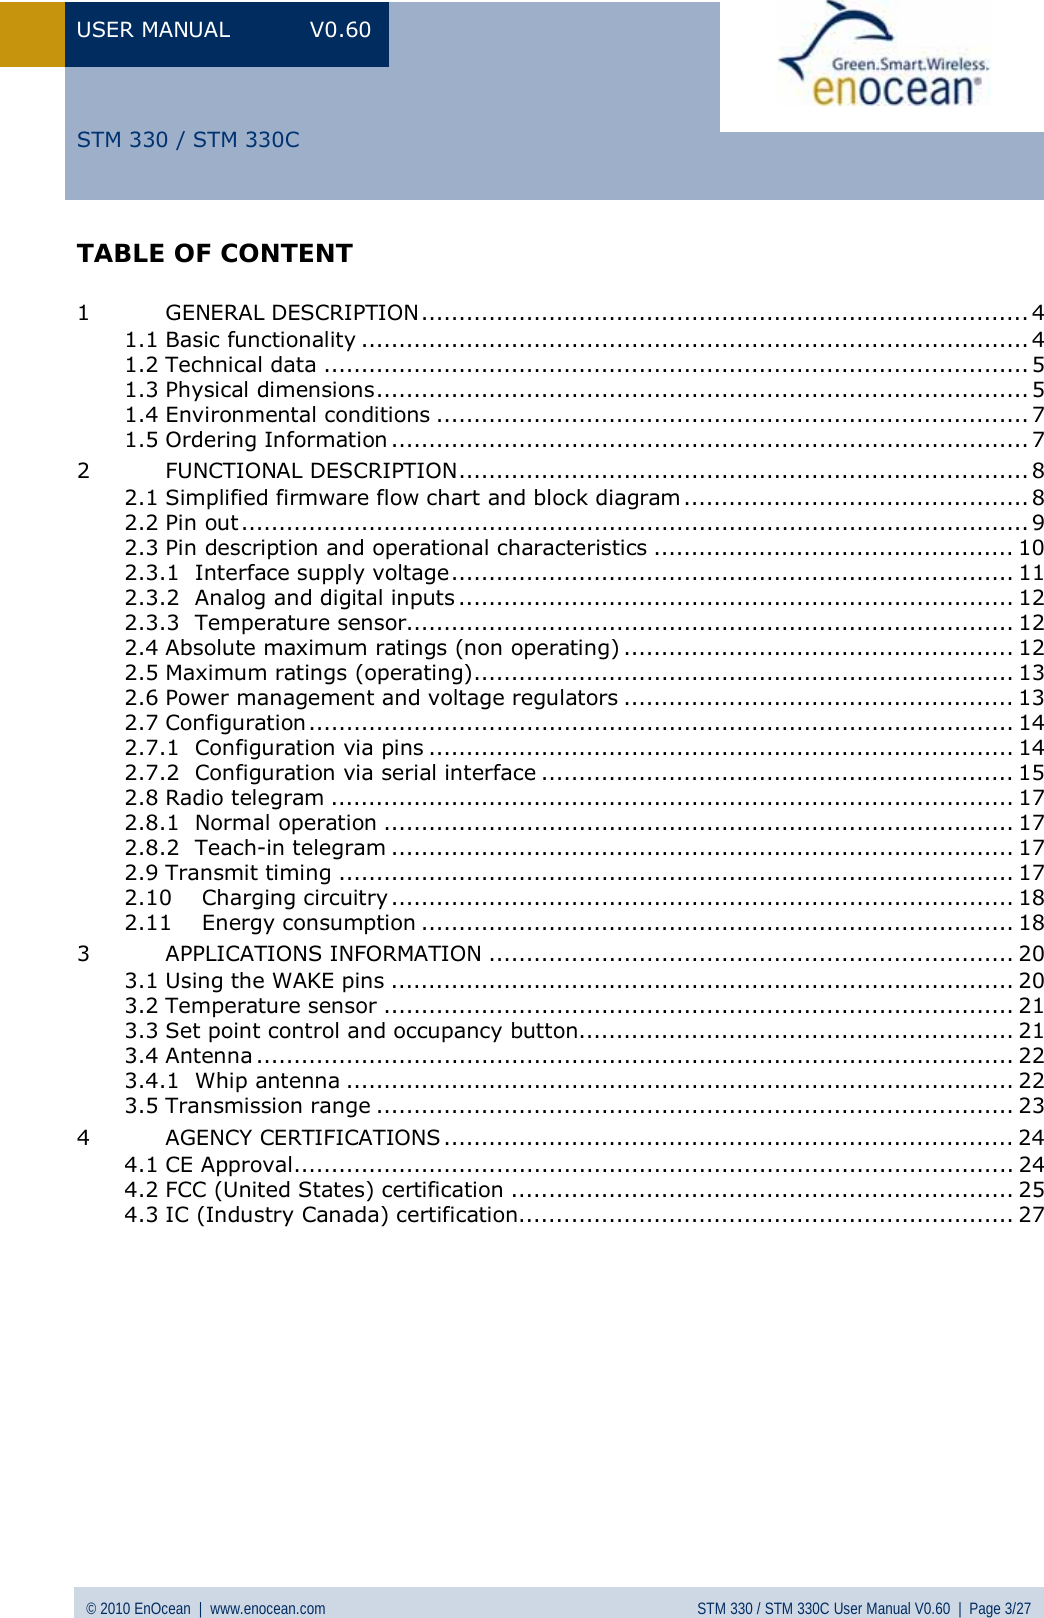 USER MANUAL V0.60 © 2010 EnOcean  |  www.enocean.com STM 330 / STM 330C User Manual V0.60  |  Page 3/27  STM 330 / STM 330CTABLE OF CONTENT  1 GENERAL DESCRIPTION................................................................................. 4 1.1 Basic functionality ......................................................................................... 4 1.2 Technical data .............................................................................................. 5 1.3 Physical dimensions....................................................................................... 5 1.4 Environmental conditions ............................................................................... 7 1.5 Ordering Information ..................................................................................... 7 2 FUNCTIONAL DESCRIPTION............................................................................ 8 2.1 Simplified firmware flow chart and block diagram.............................................. 8 2.2 Pin out ......................................................................................................... 9 2.3 Pin description and operational characteristics ................................................ 10 2.3.1 Interface supply voltage........................................................................... 11 2.3.2 Analog and digital inputs .......................................................................... 12 2.3.3 Temperature sensor................................................................................. 12 2.4 Absolute maximum ratings (non operating) .................................................... 12 2.5 Maximum ratings (operating)........................................................................ 13 2.6 Power management and voltage regulators .................................................... 13 2.7 Configuration.............................................................................................. 14 2.7.1 Configuration via pins .............................................................................. 14 2.7.2 Configuration via serial interface ............................................................... 15 2.8 Radio telegram ........................................................................................... 17 2.8.1 Normal operation .................................................................................... 17 2.8.2 Teach-in telegram ................................................................................... 17 2.9 Transmit timing .......................................................................................... 17 2.10 Charging circuitry................................................................................... 18 2.11 Energy consumption ............................................................................... 18 3 APPLICATIONS INFORMATION ...................................................................... 20 3.1 Using the WAKE pins ................................................................................... 20 3.2 Temperature sensor .................................................................................... 21 3.3 Set point control and occupancy button.......................................................... 21 3.4 Antenna ..................................................................................................... 22 3.4.1 Whip antenna ......................................................................................... 22 3.5 Transmission range ..................................................................................... 23 4 AGENCY CERTIFICATIONS ............................................................................ 24 4.1 CE Approval................................................................................................ 24 4.2 FCC (United States) certification ................................................................... 25 4.3 IC (Industry Canada) certification.................................................................. 27  